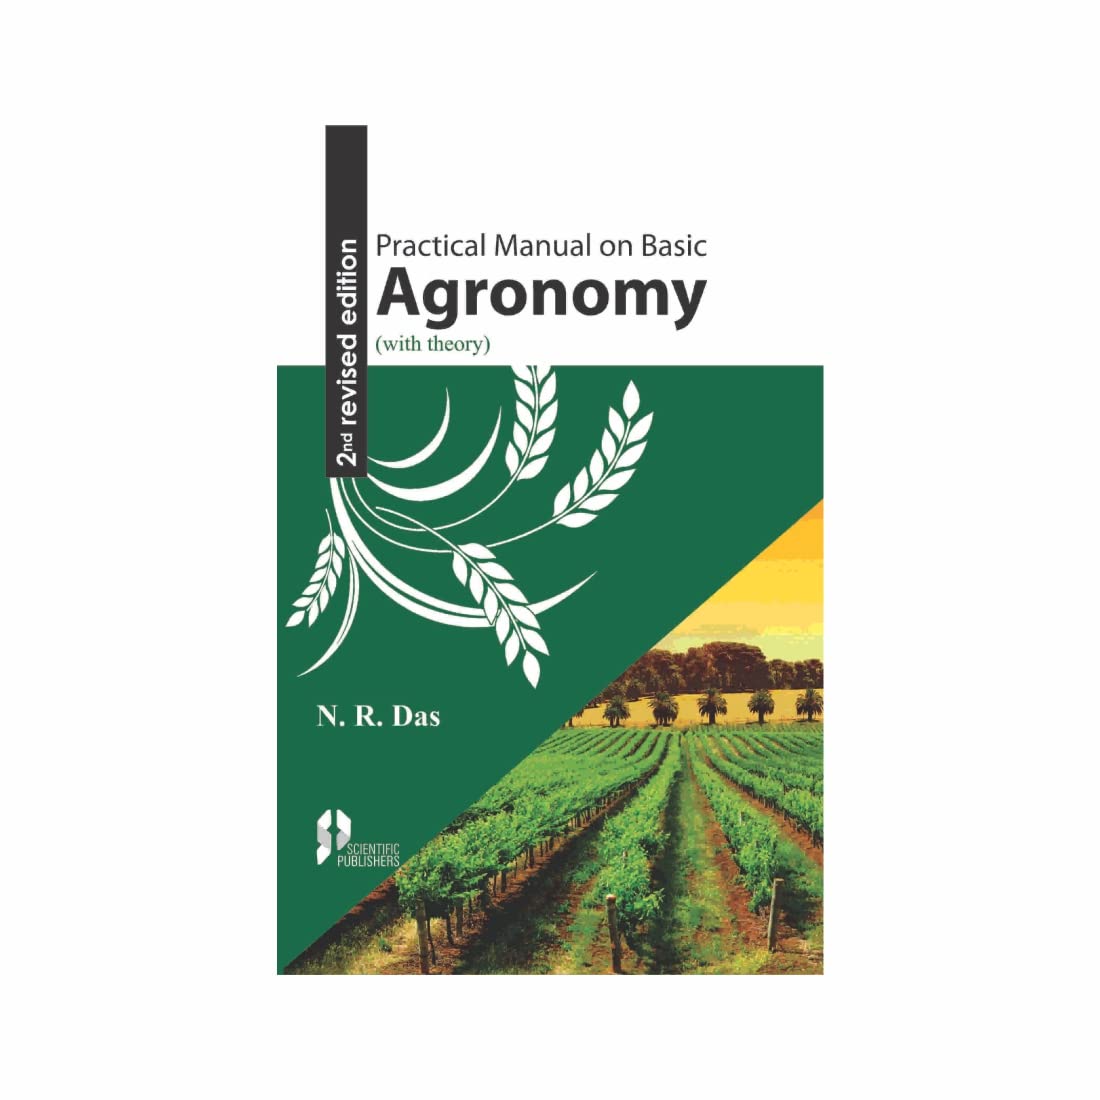 Practical Manual on Basic Agronomy (With Theory) (2nd Edition) By N.R. Das